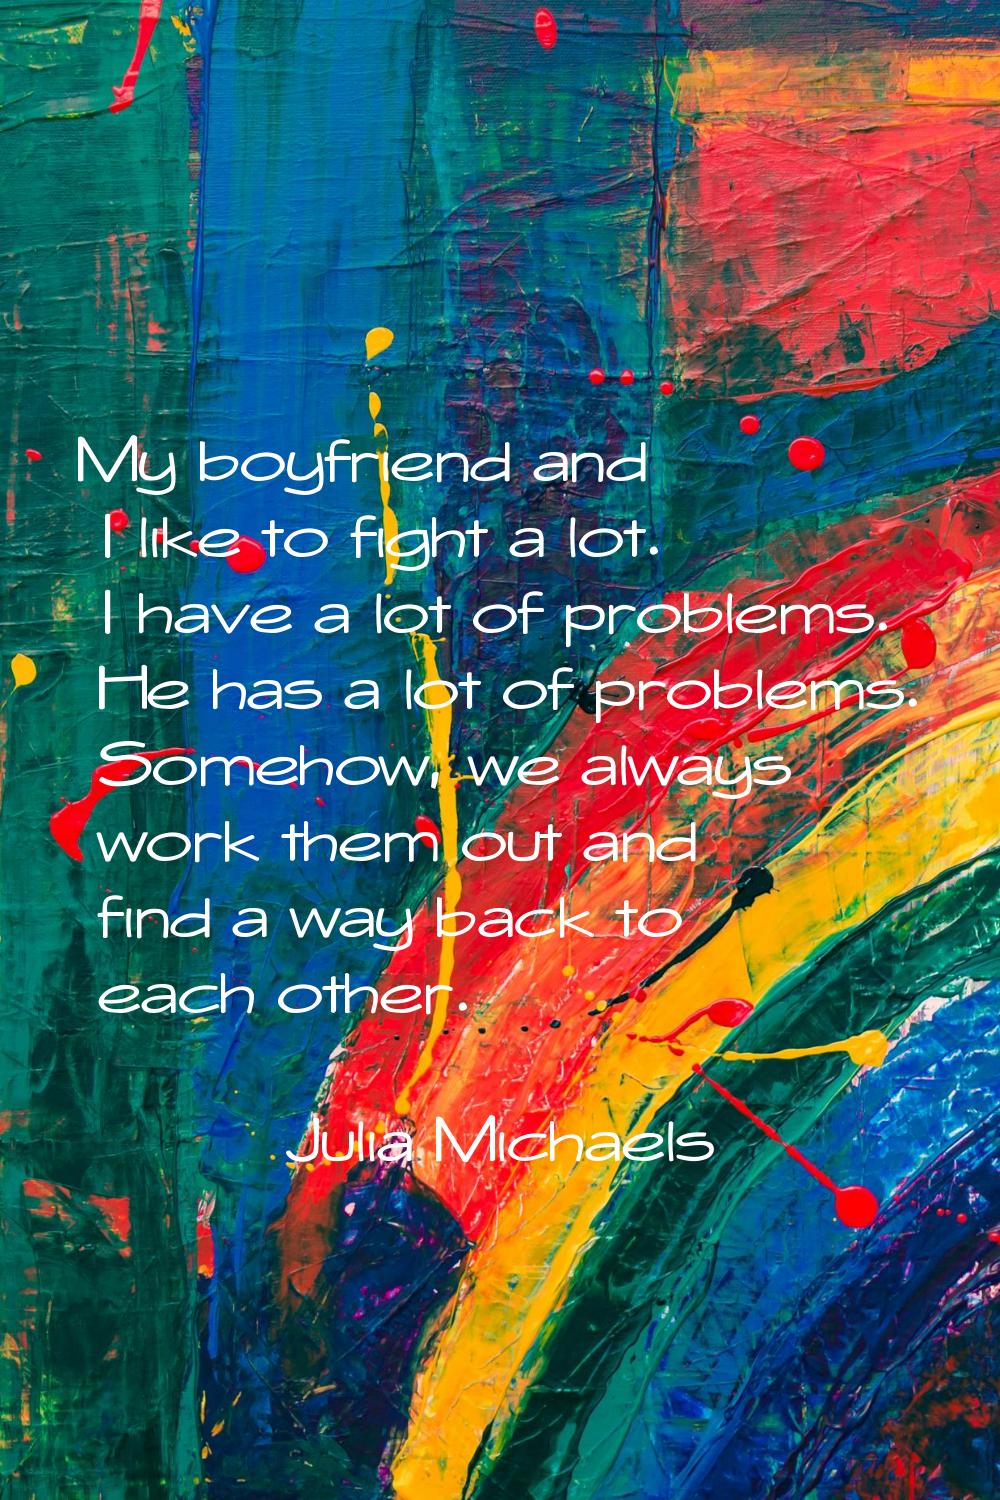 My boyfriend and I like to fight a lot. I have a lot of problems. He has a lot of problems. Somehow